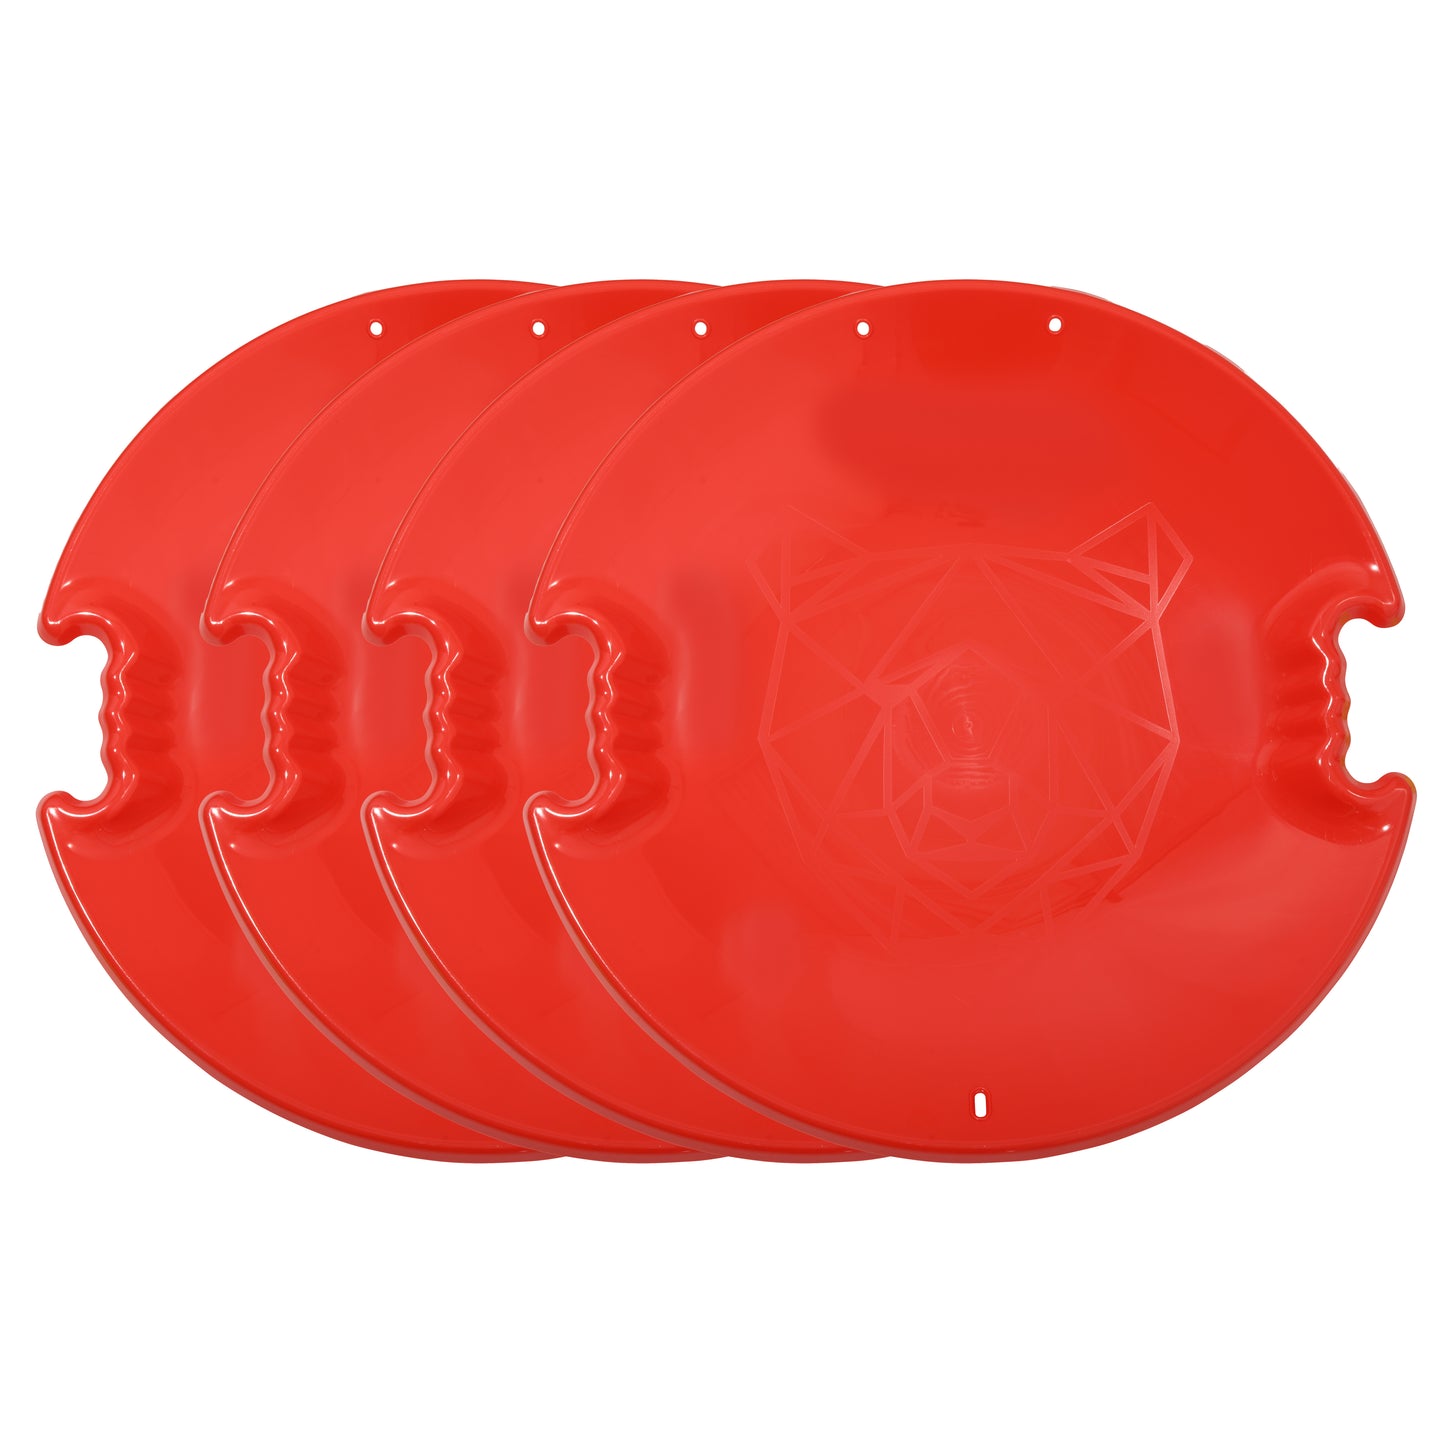 Superio Round Avalanche Snow Saucer Sled 26" Red